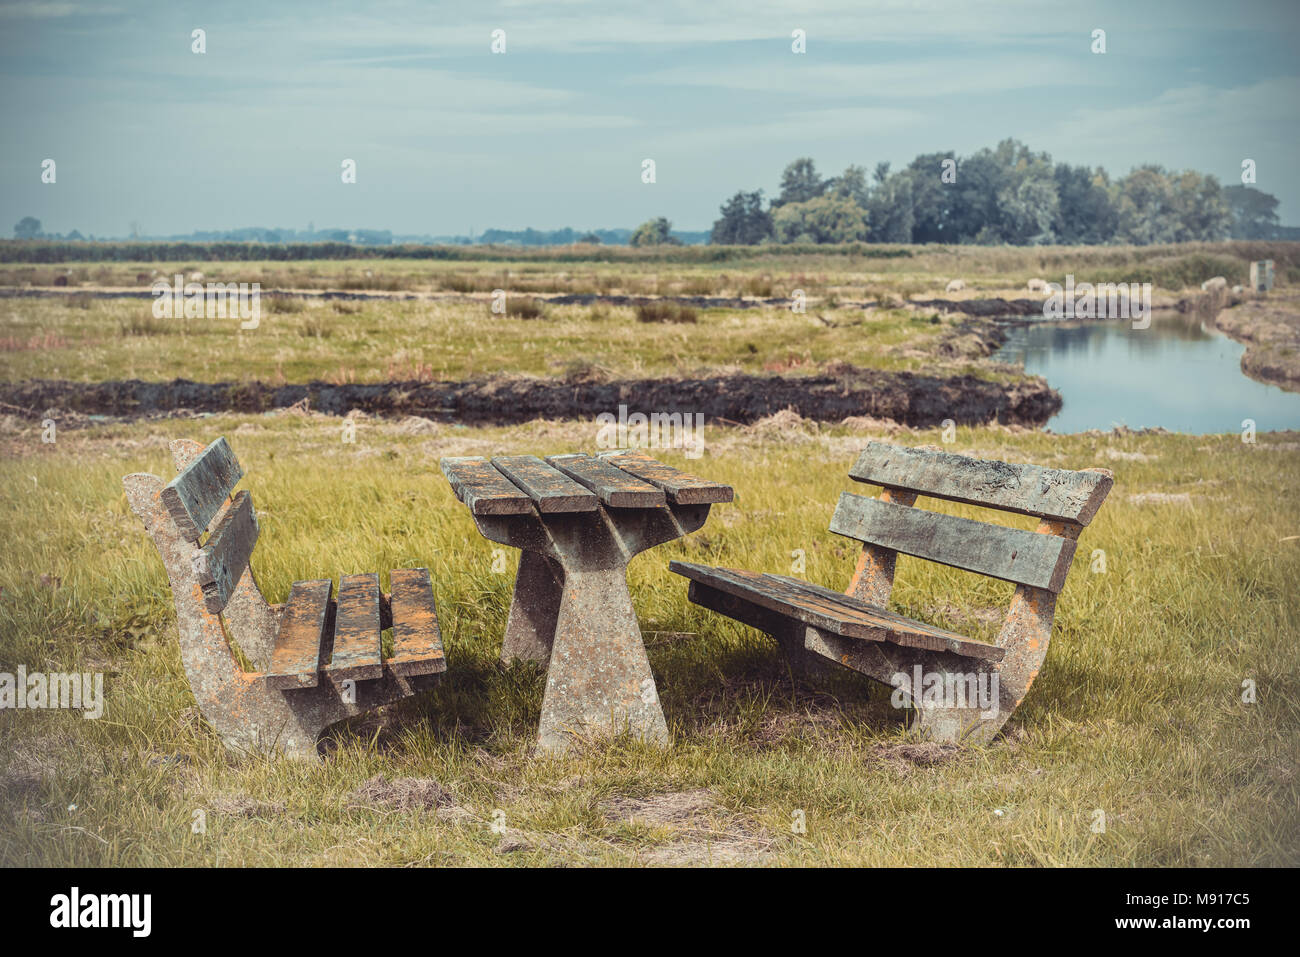 Empty Wooden table and benches in resting area at roadside near river Stock Photo